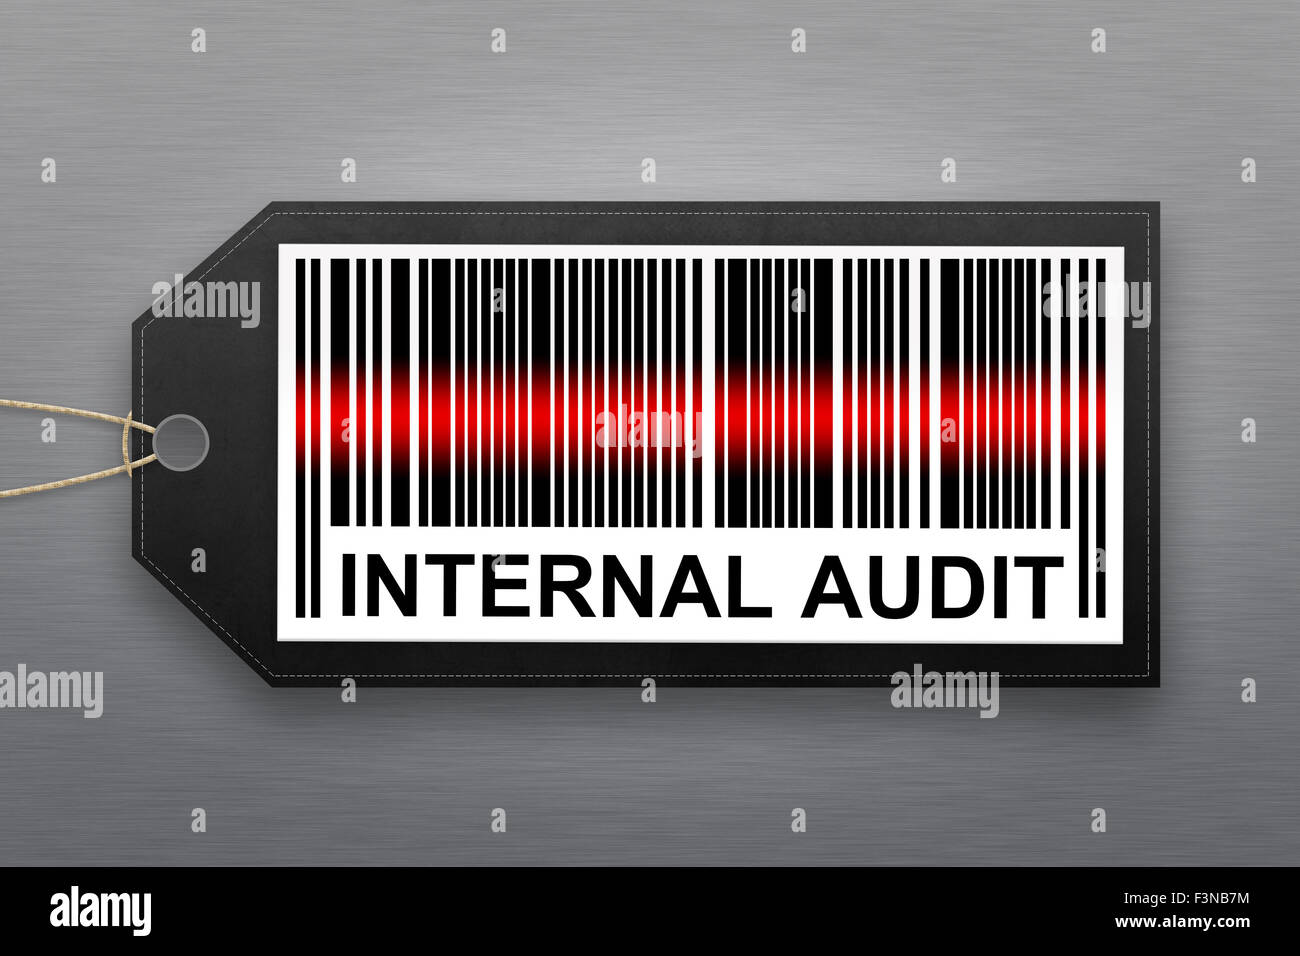 internal audit barcode with stainless steel background Stock Photo